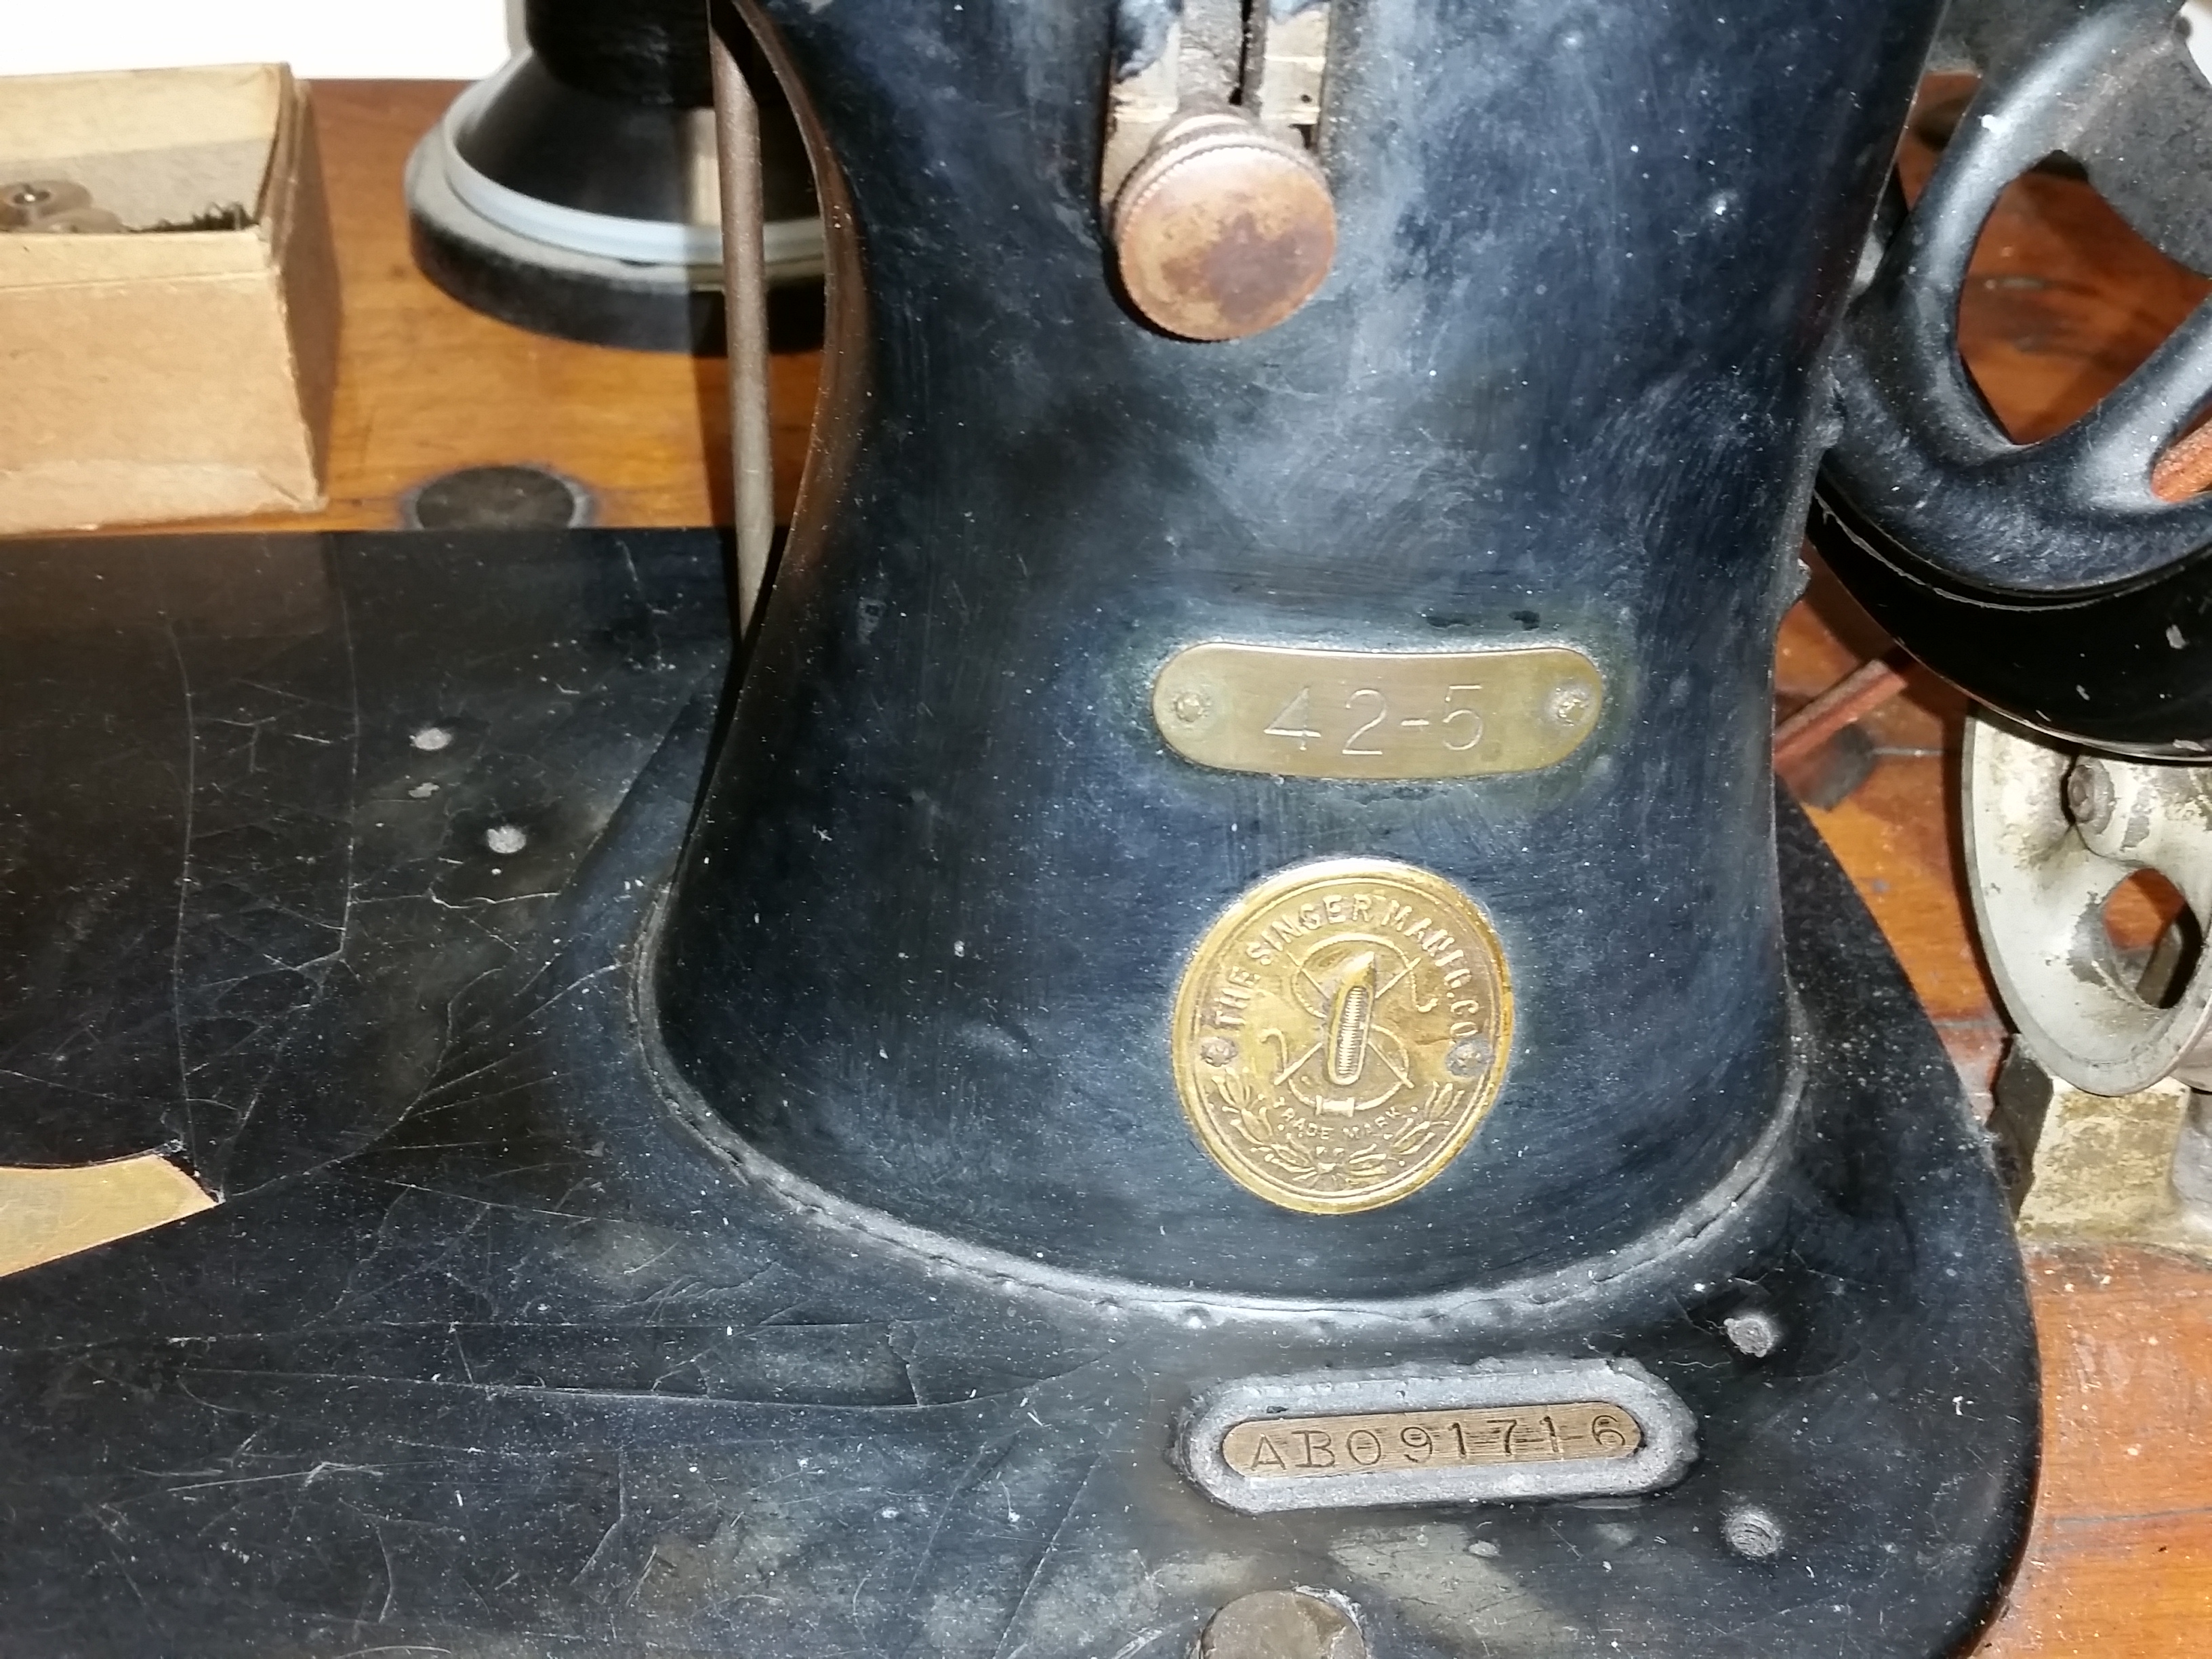 Why is the head structure of a leather sewing machine important? -  Knowledge - Topeagle Sewing Machines